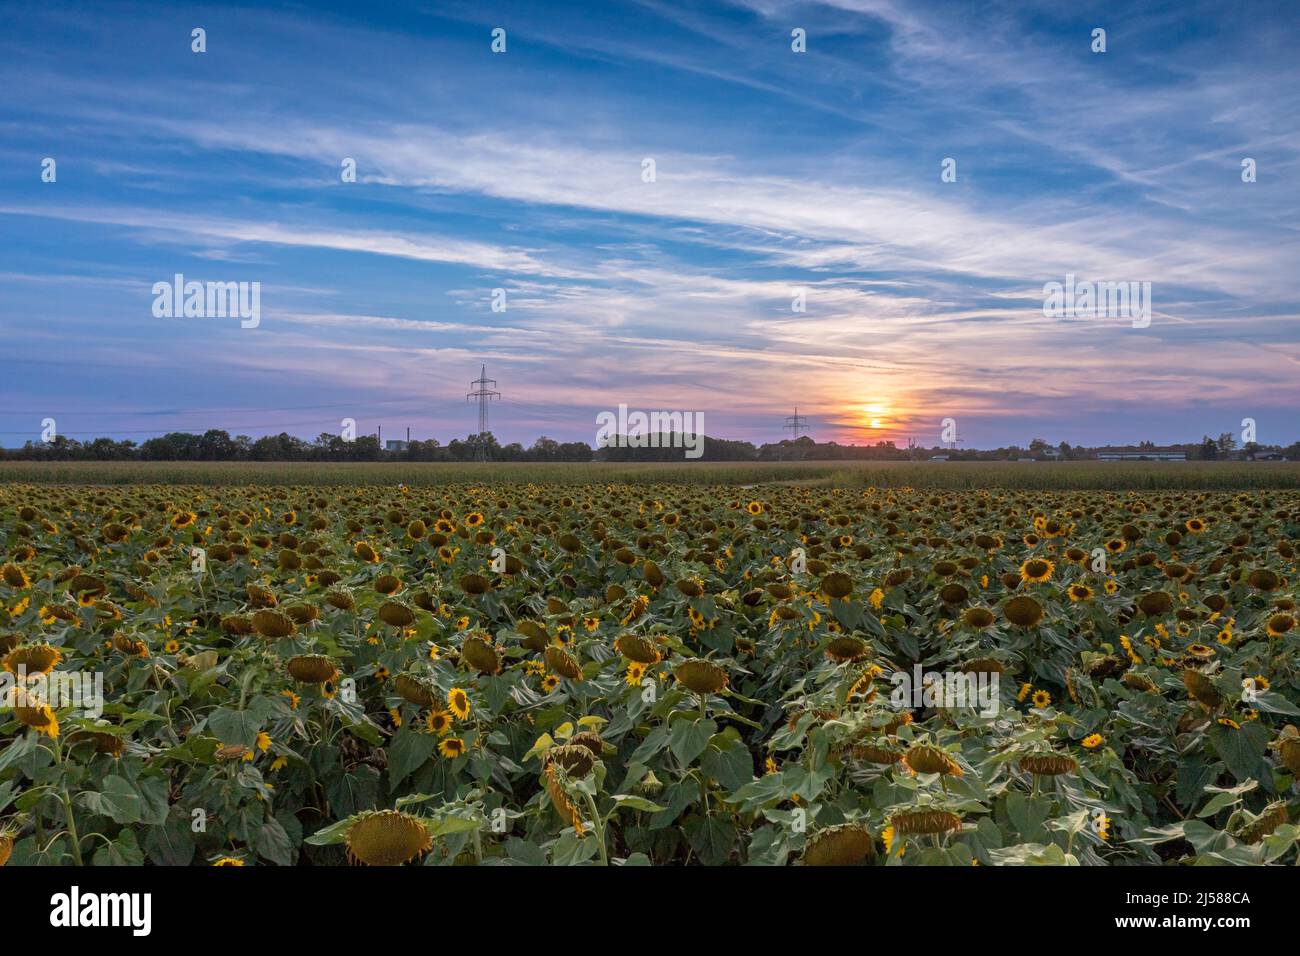 Sunflower field with setting sun on a late summer evening Stock Photo